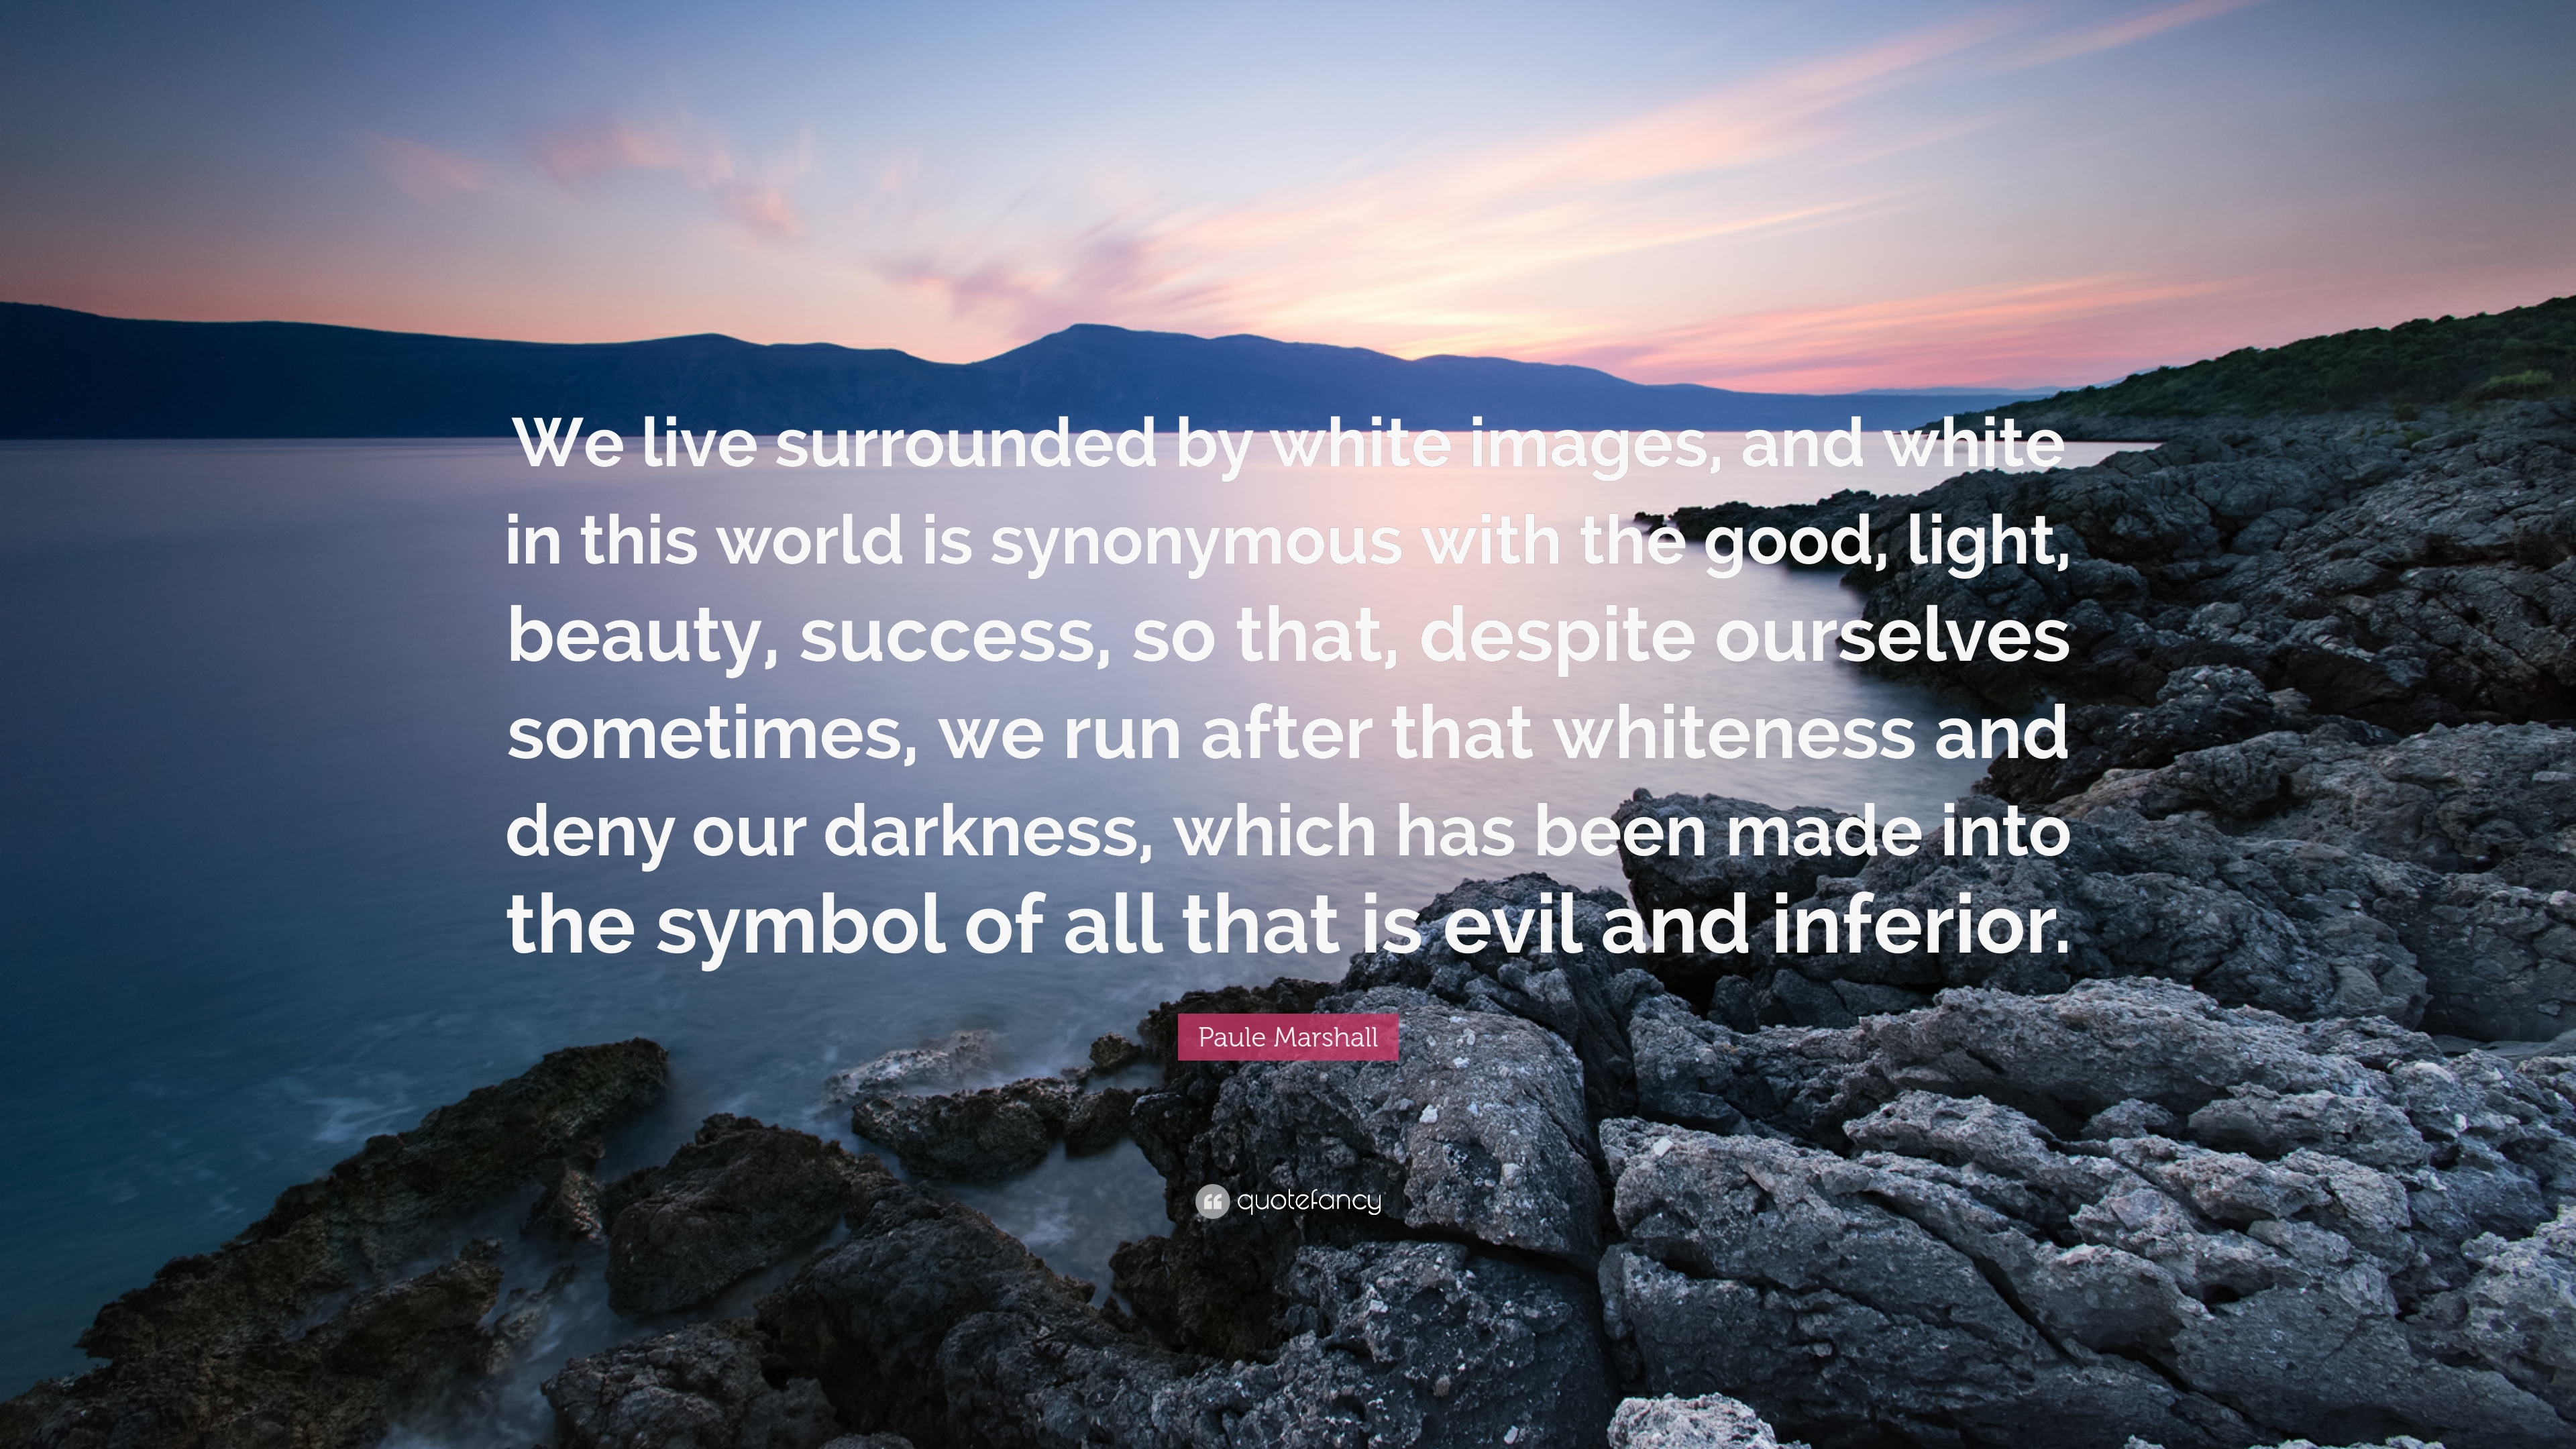 Paule Marshall Quote: “We live surrounded by white image, and white